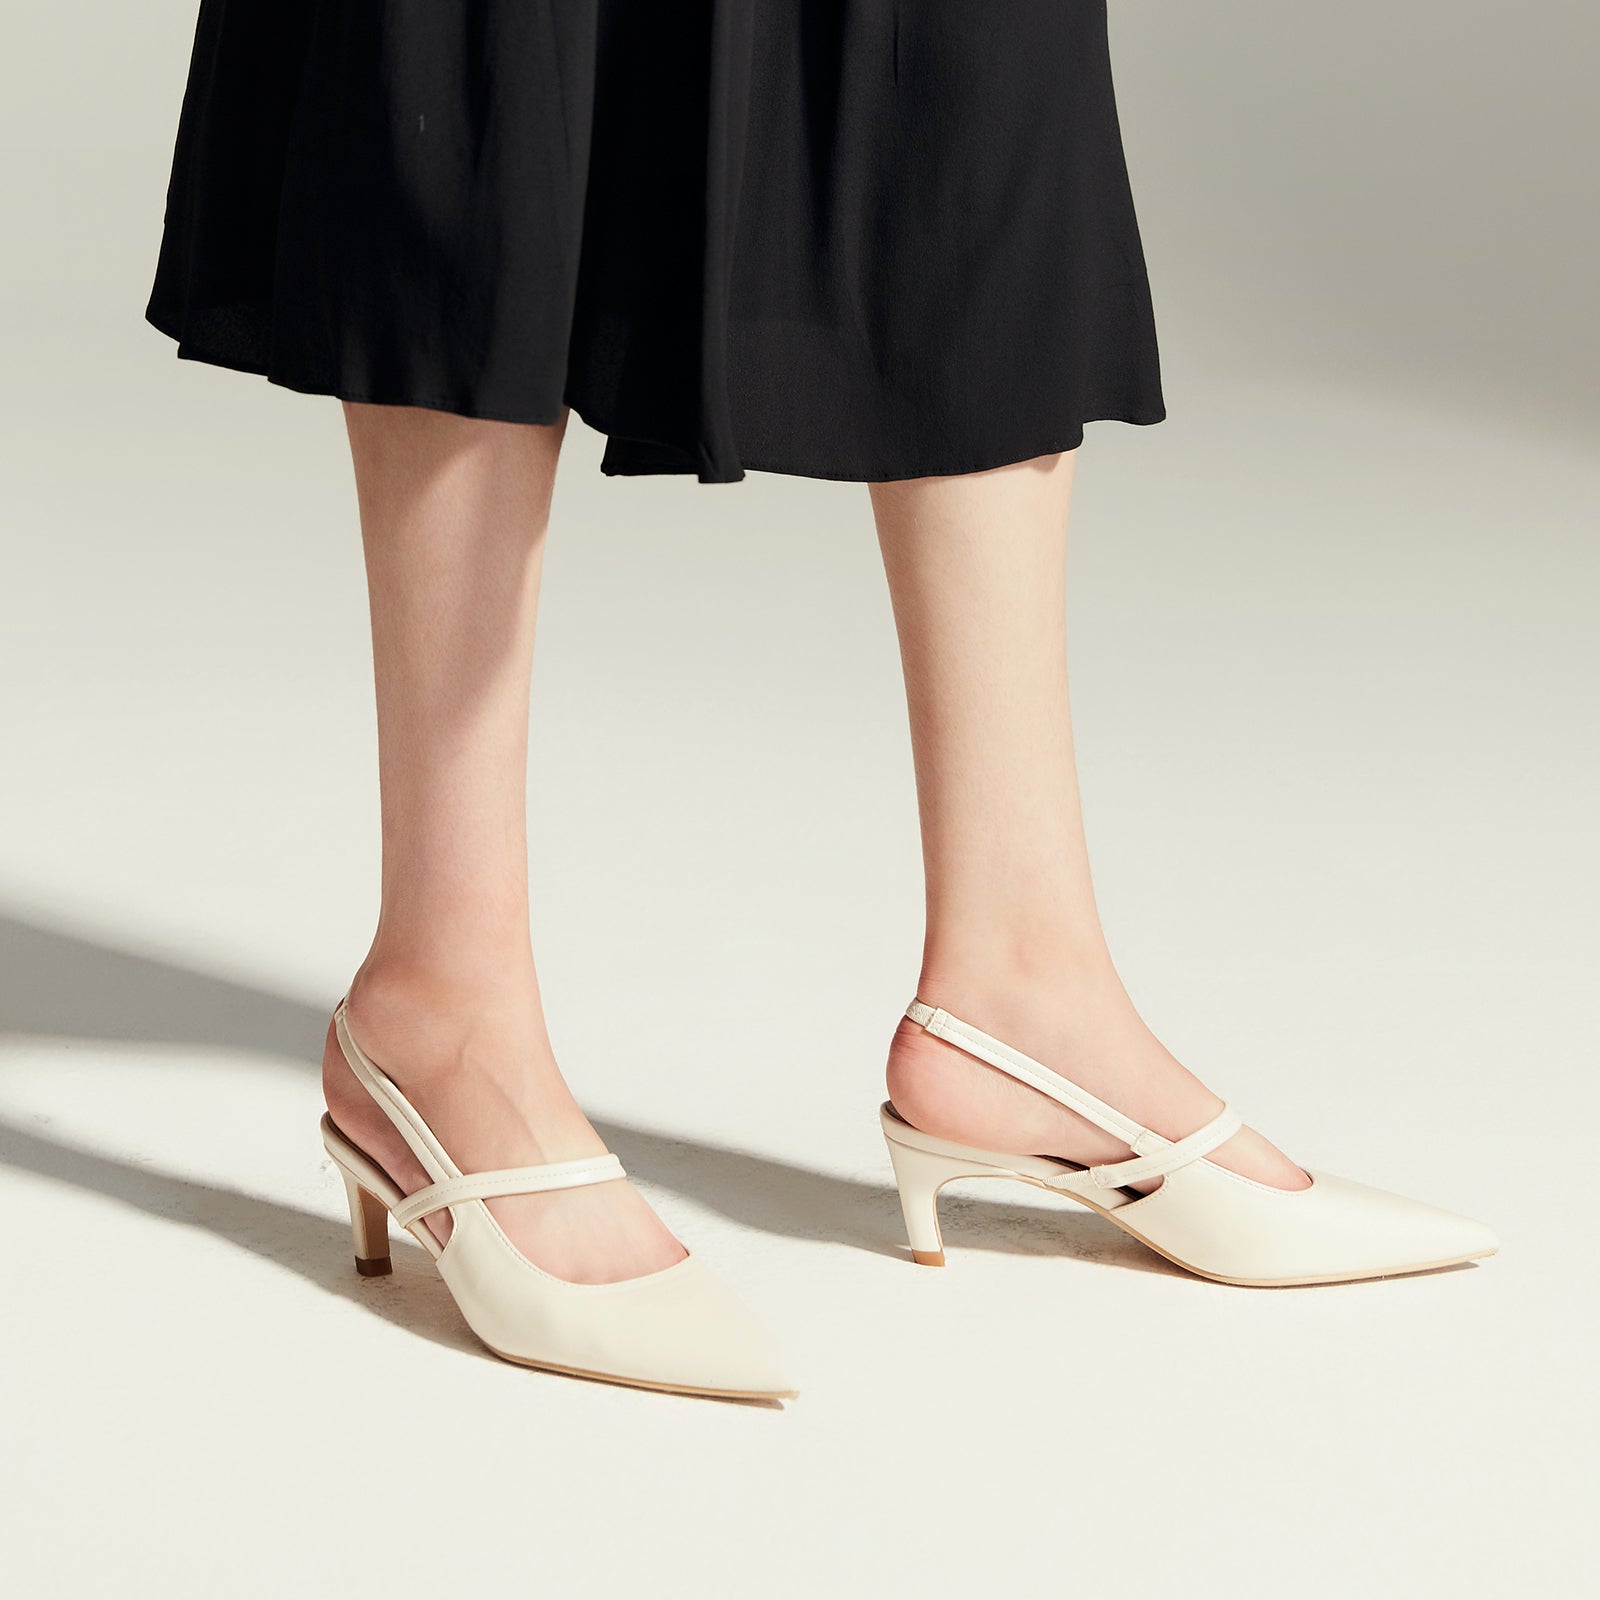 White Strappy Slingback Pumps with a pointed toe, combining comfort with a touch of timeless elegance